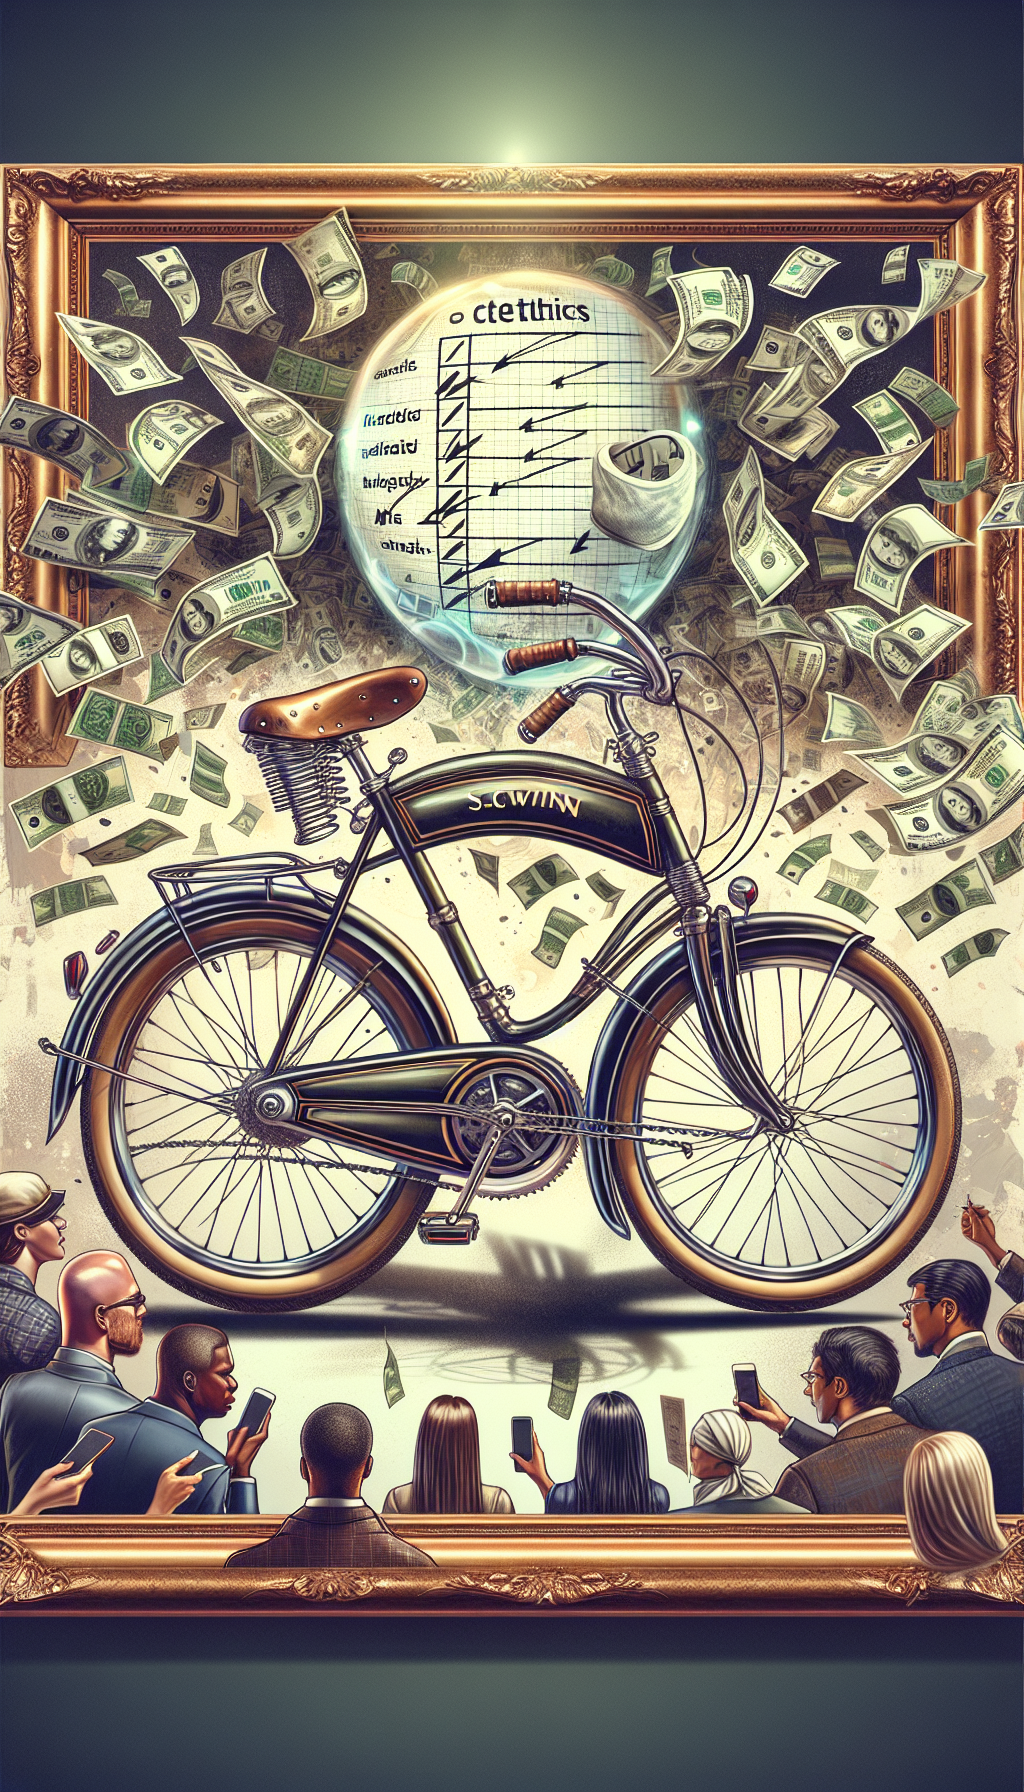 An illustration of a glistening vintage Schwinn bicycle, its chrome accents catching the light, staged in a spotlight against a backdrop of floating dollar bills. Overhead, a strategic checklist hovers like a thought bubble, while eager buyers with various bid signs press forward. The corners of the image subtly fade into sepia, hinting at the bike's nostalgic worth.